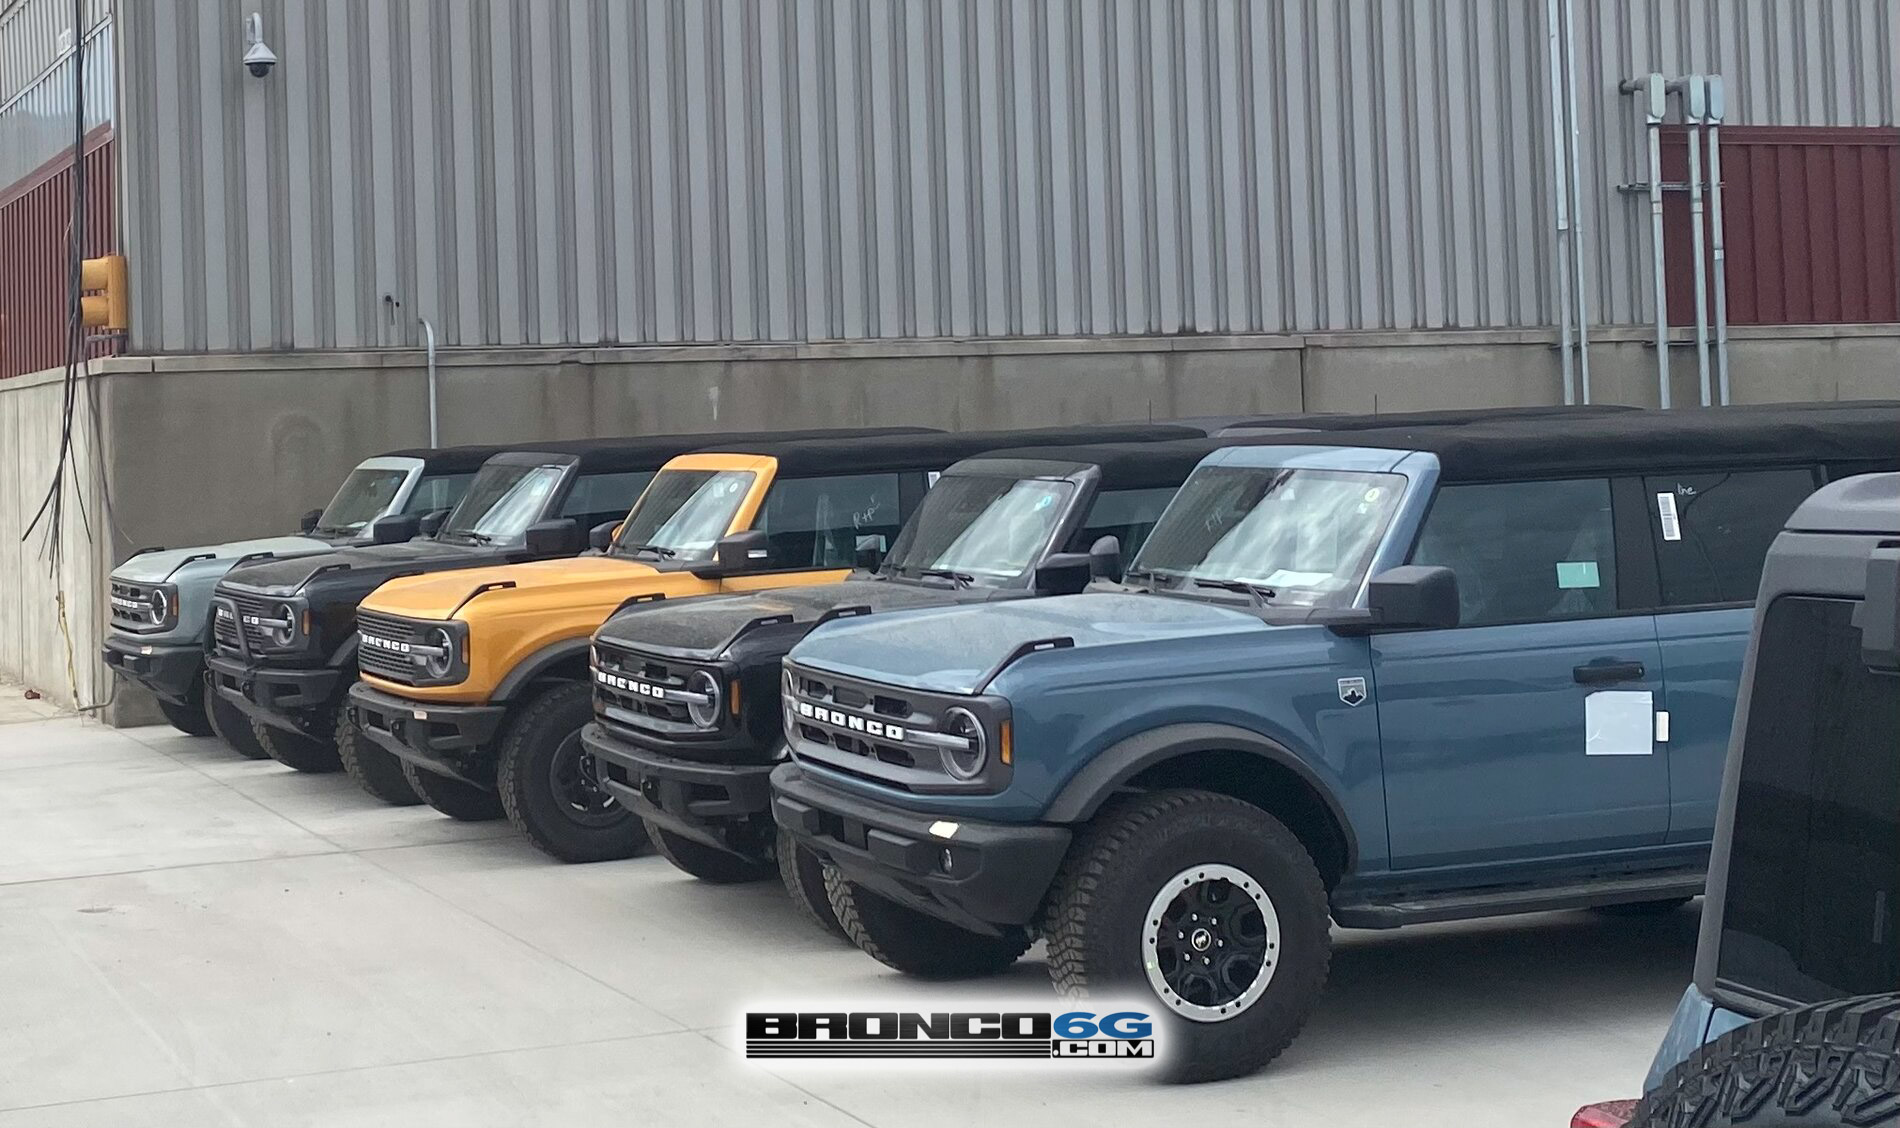 Ford Bronco Pics of 2021 Broncos in MAP holding yard area. Any requests for pictures? 2021 Broncos holding area MAP plant factory 17